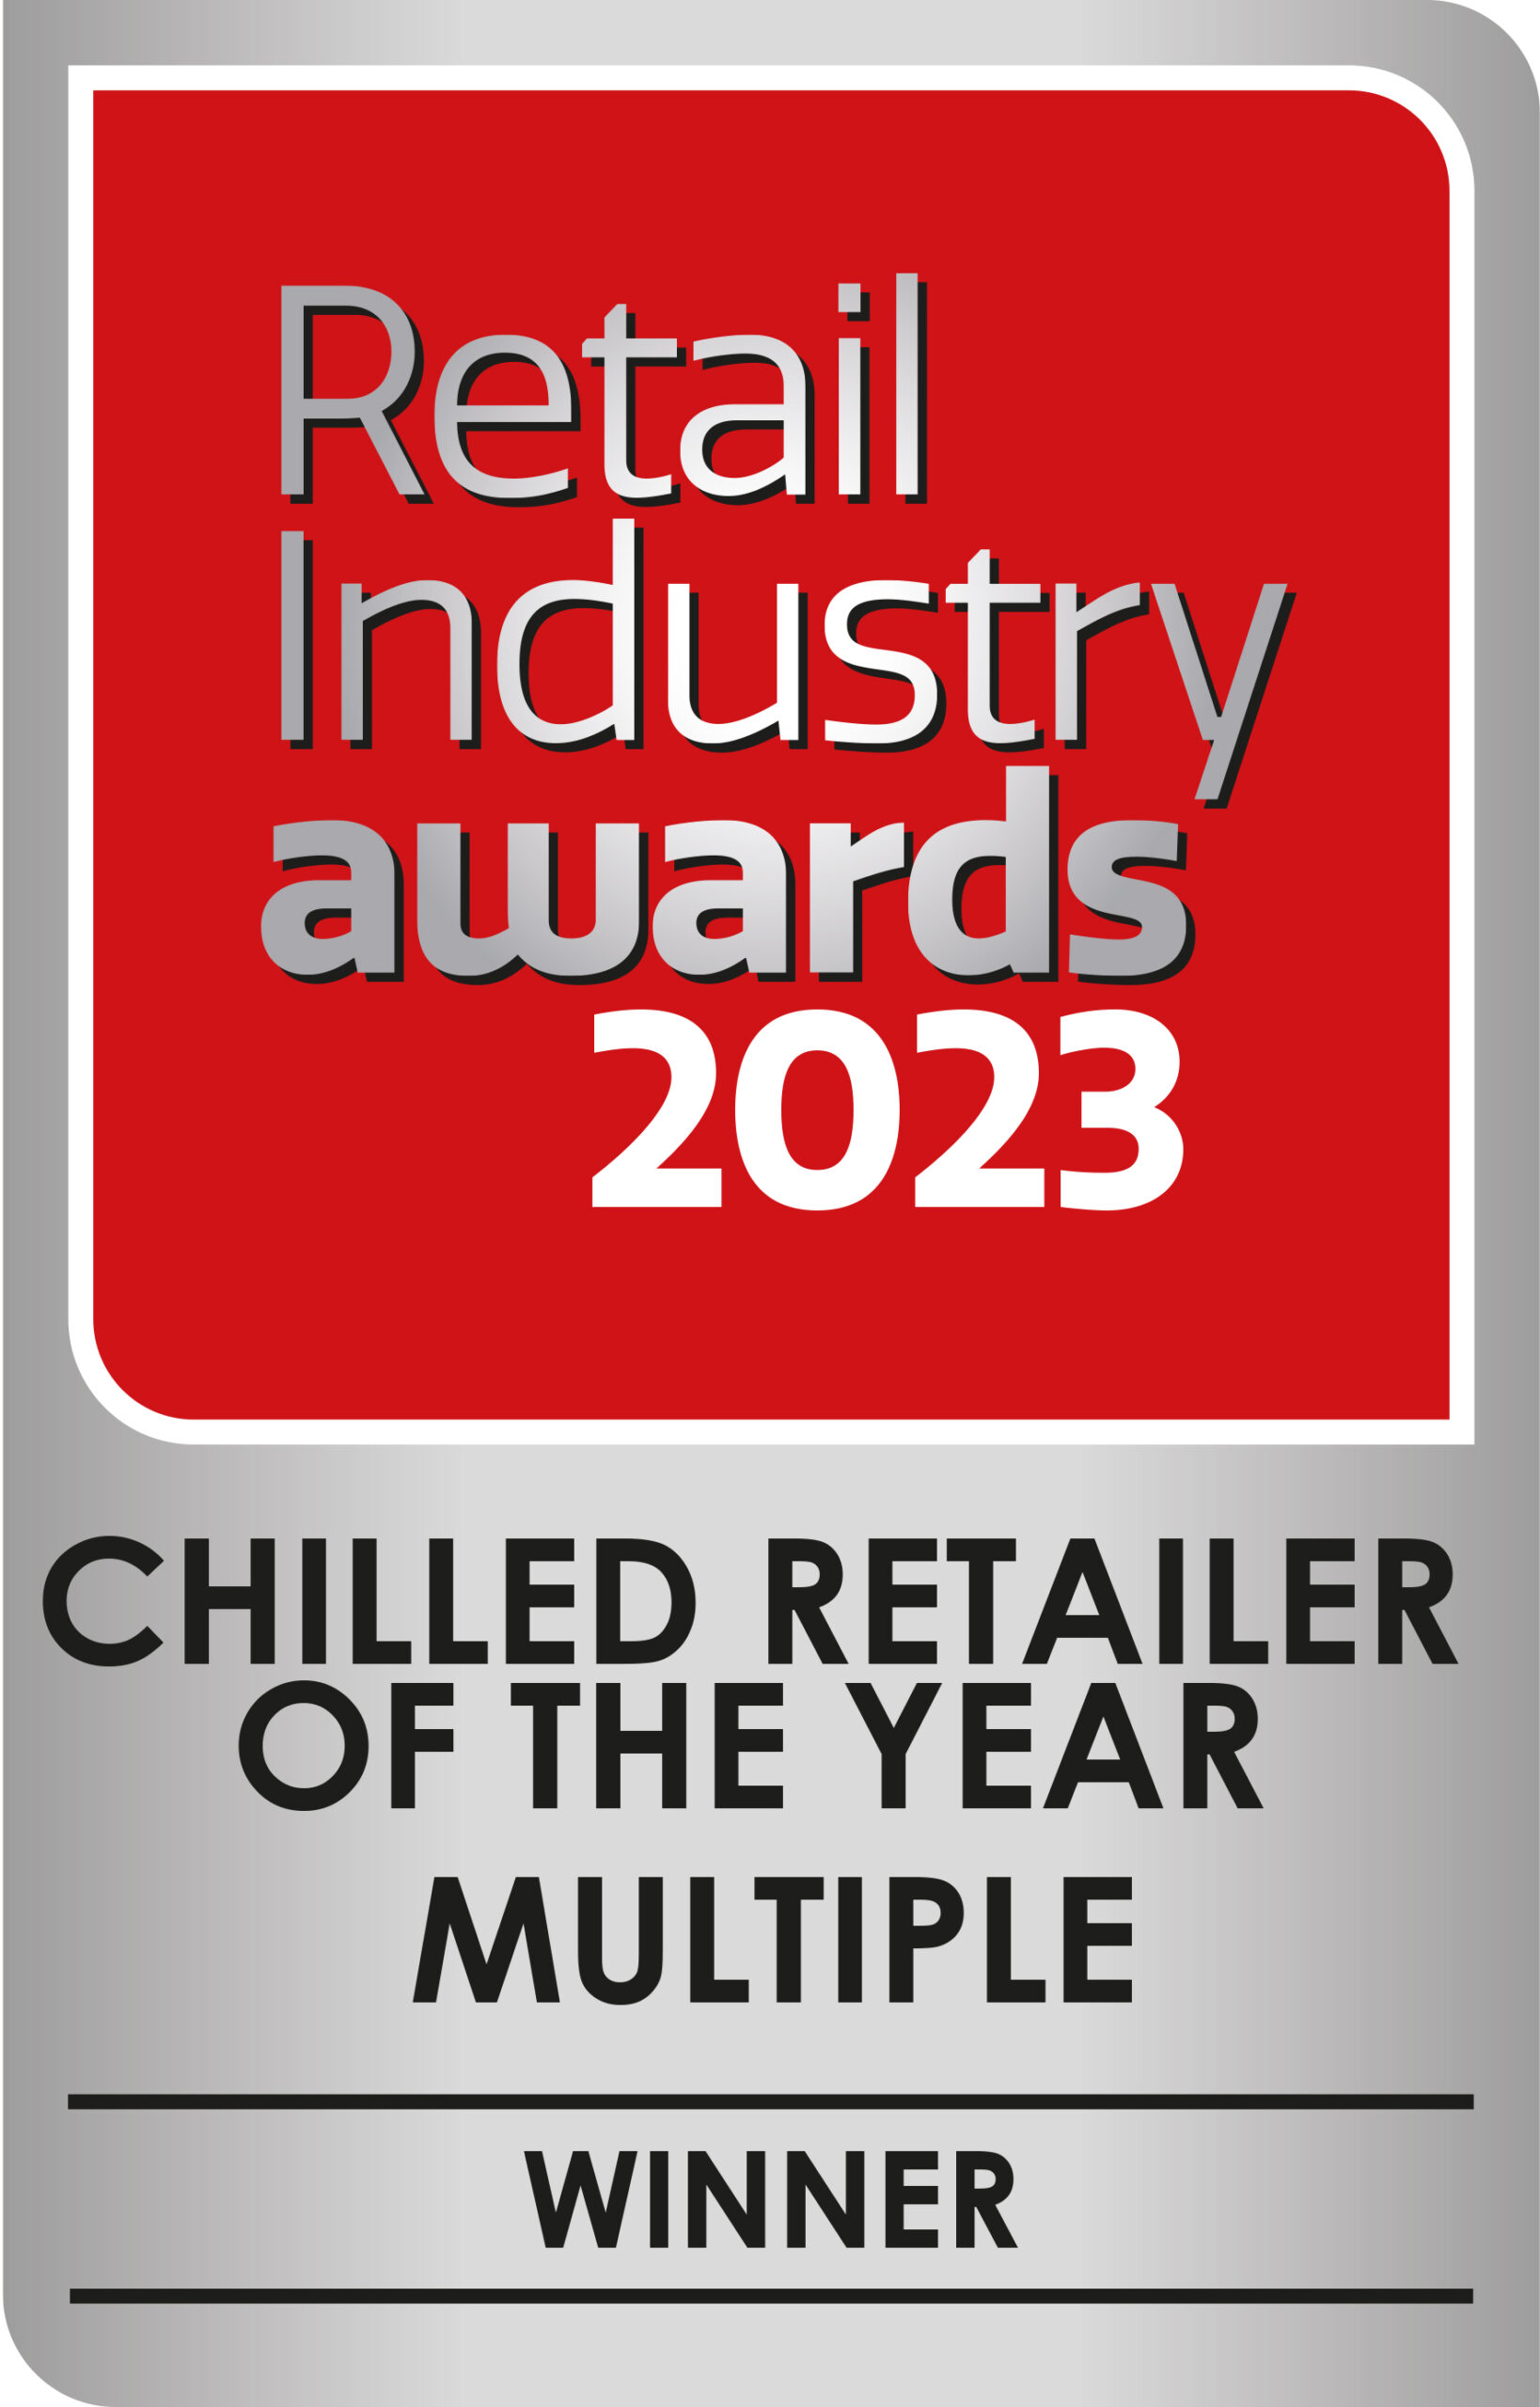 Retail Industry Awards Chilled Retailer of the Year Winner 2023